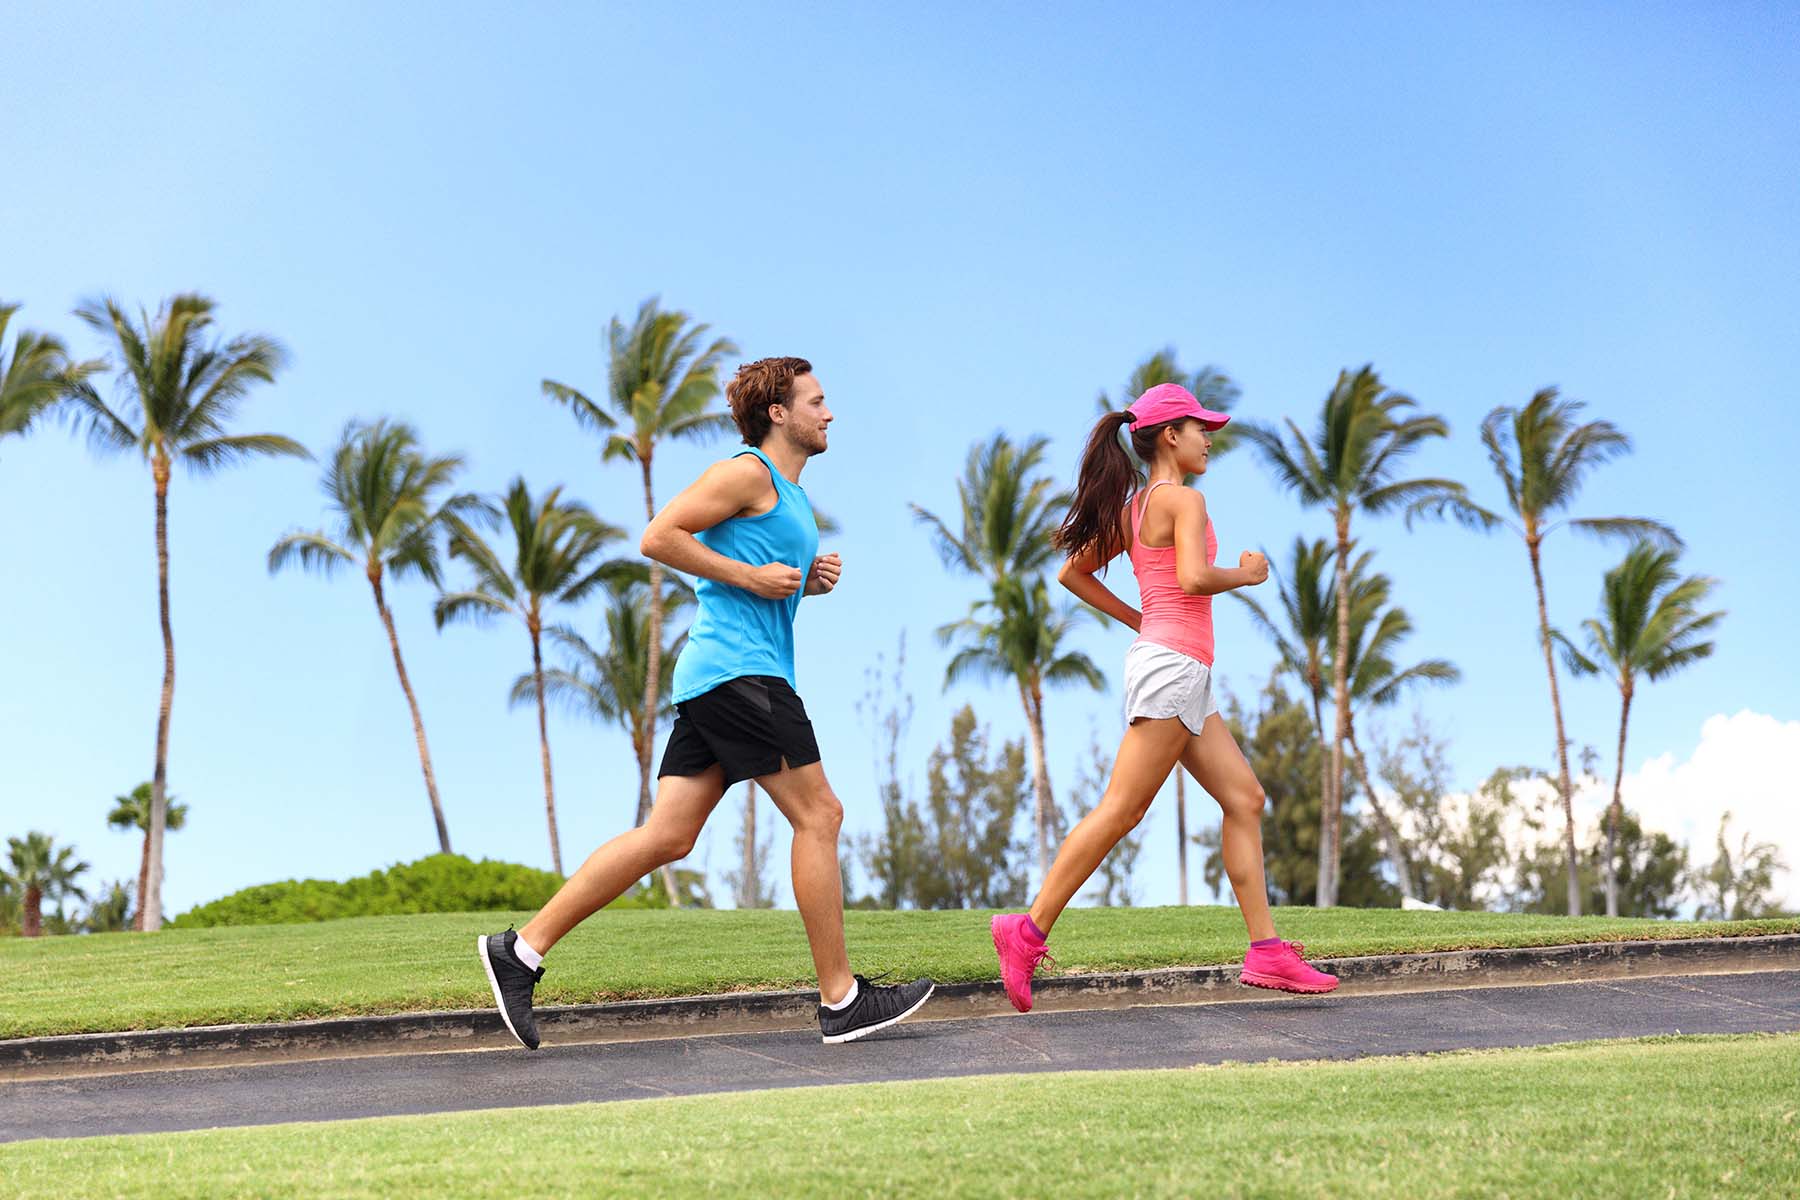 Male and female wearing athletic clothing running by palm trees